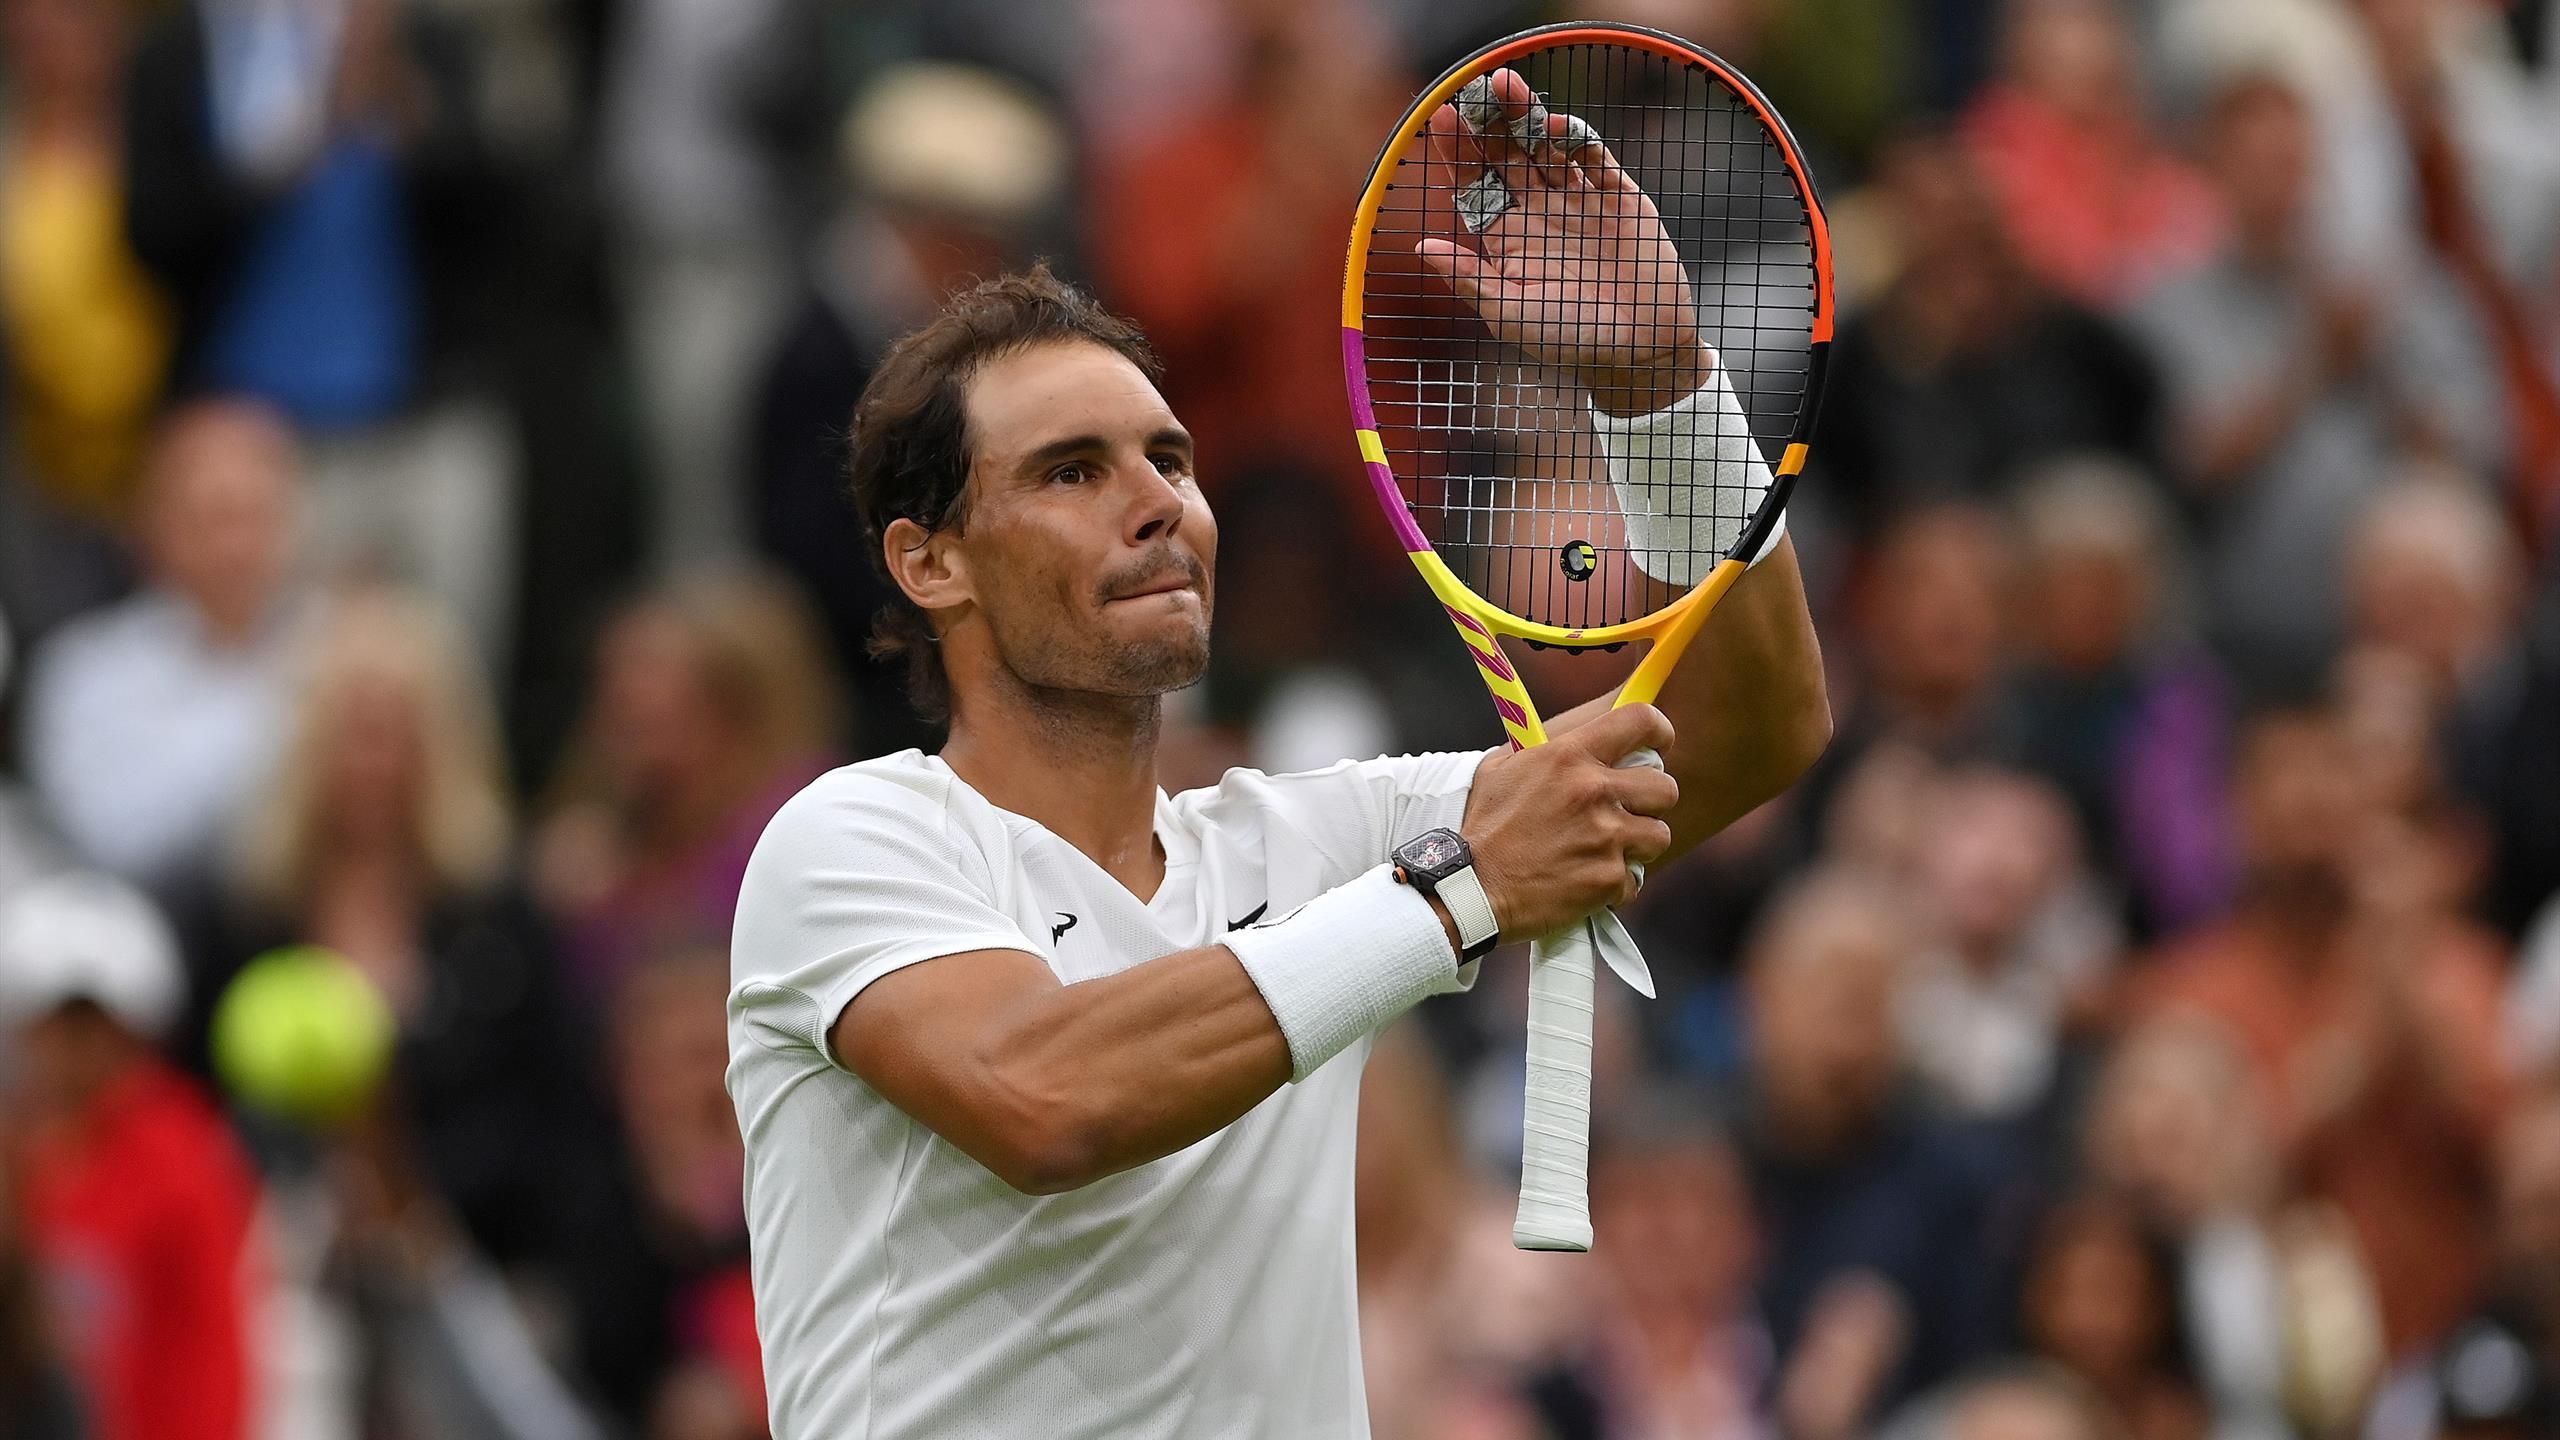 Wimbledon 2022 Day 6 Order of play, schedule - When are Rafael Nadal, Iga Swiatek and Nick Kyrgios playing?